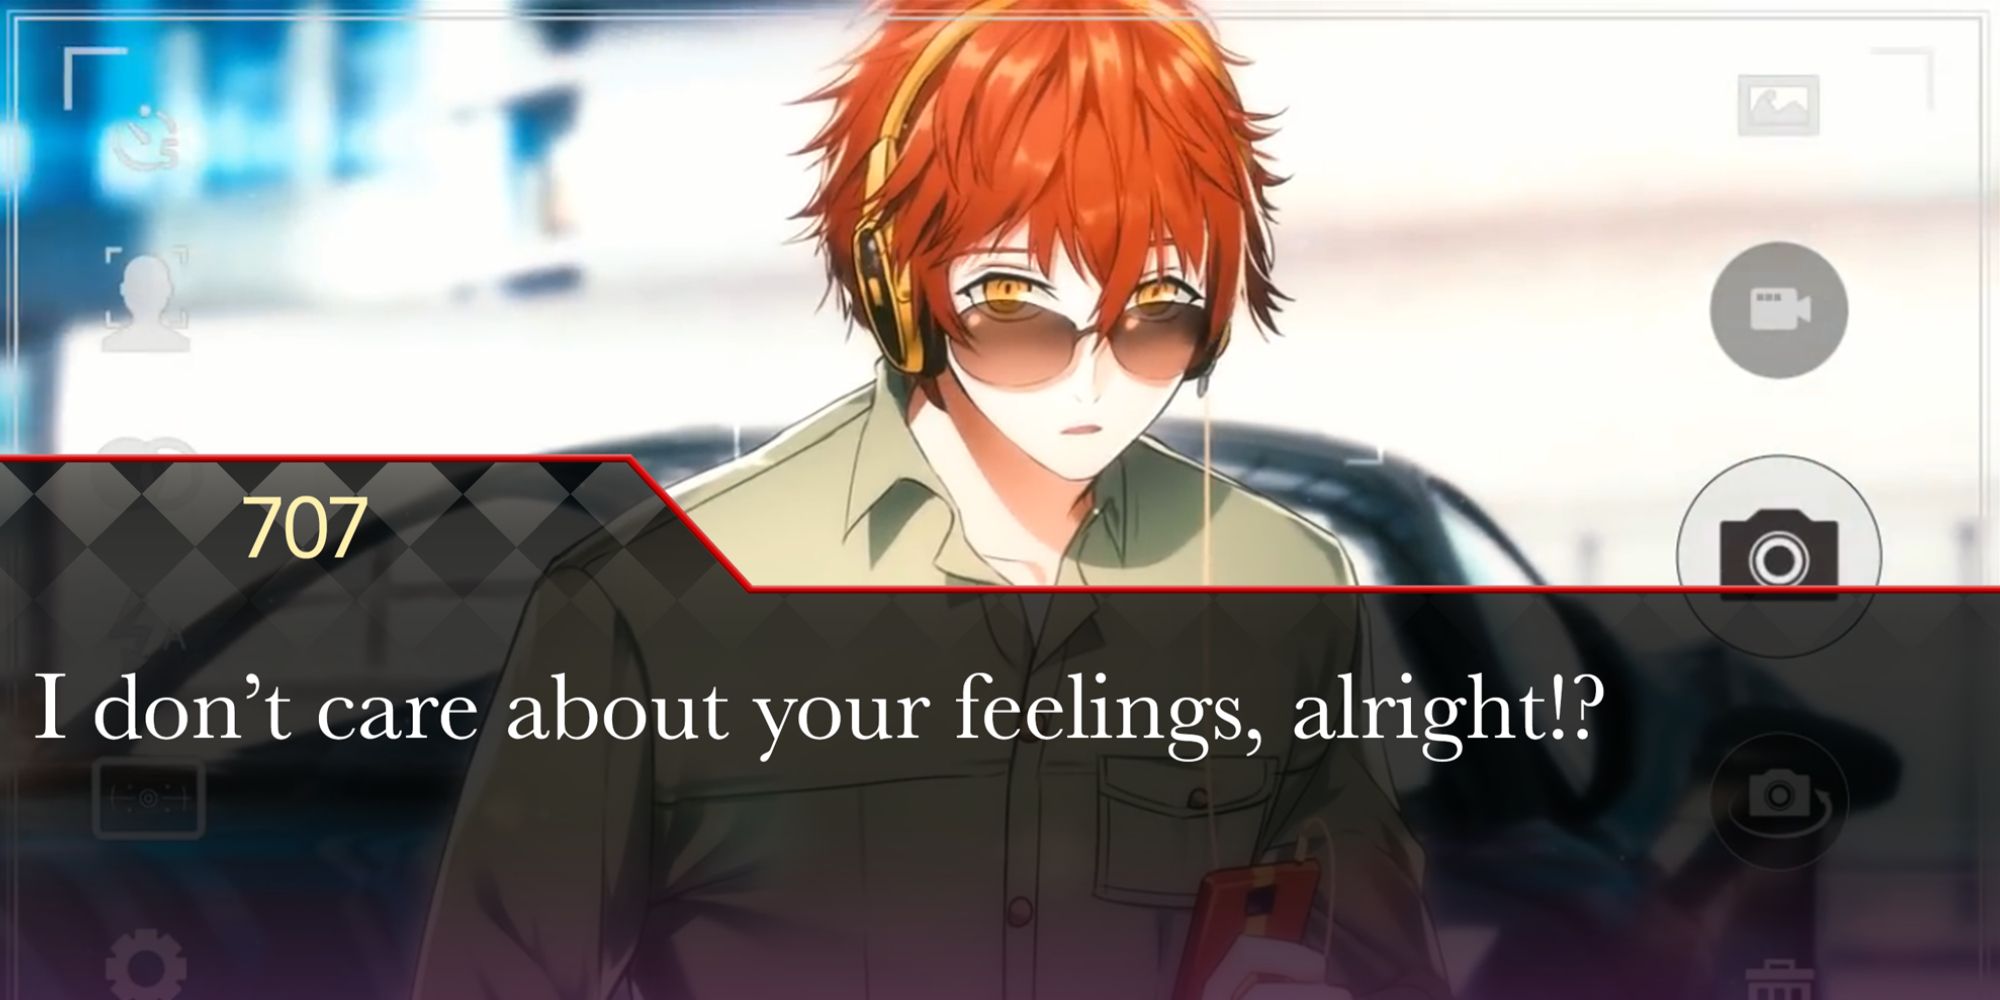 707 wears headphones &amp; shades and says he doesn't have feelings for the player in Mystic Messenger.